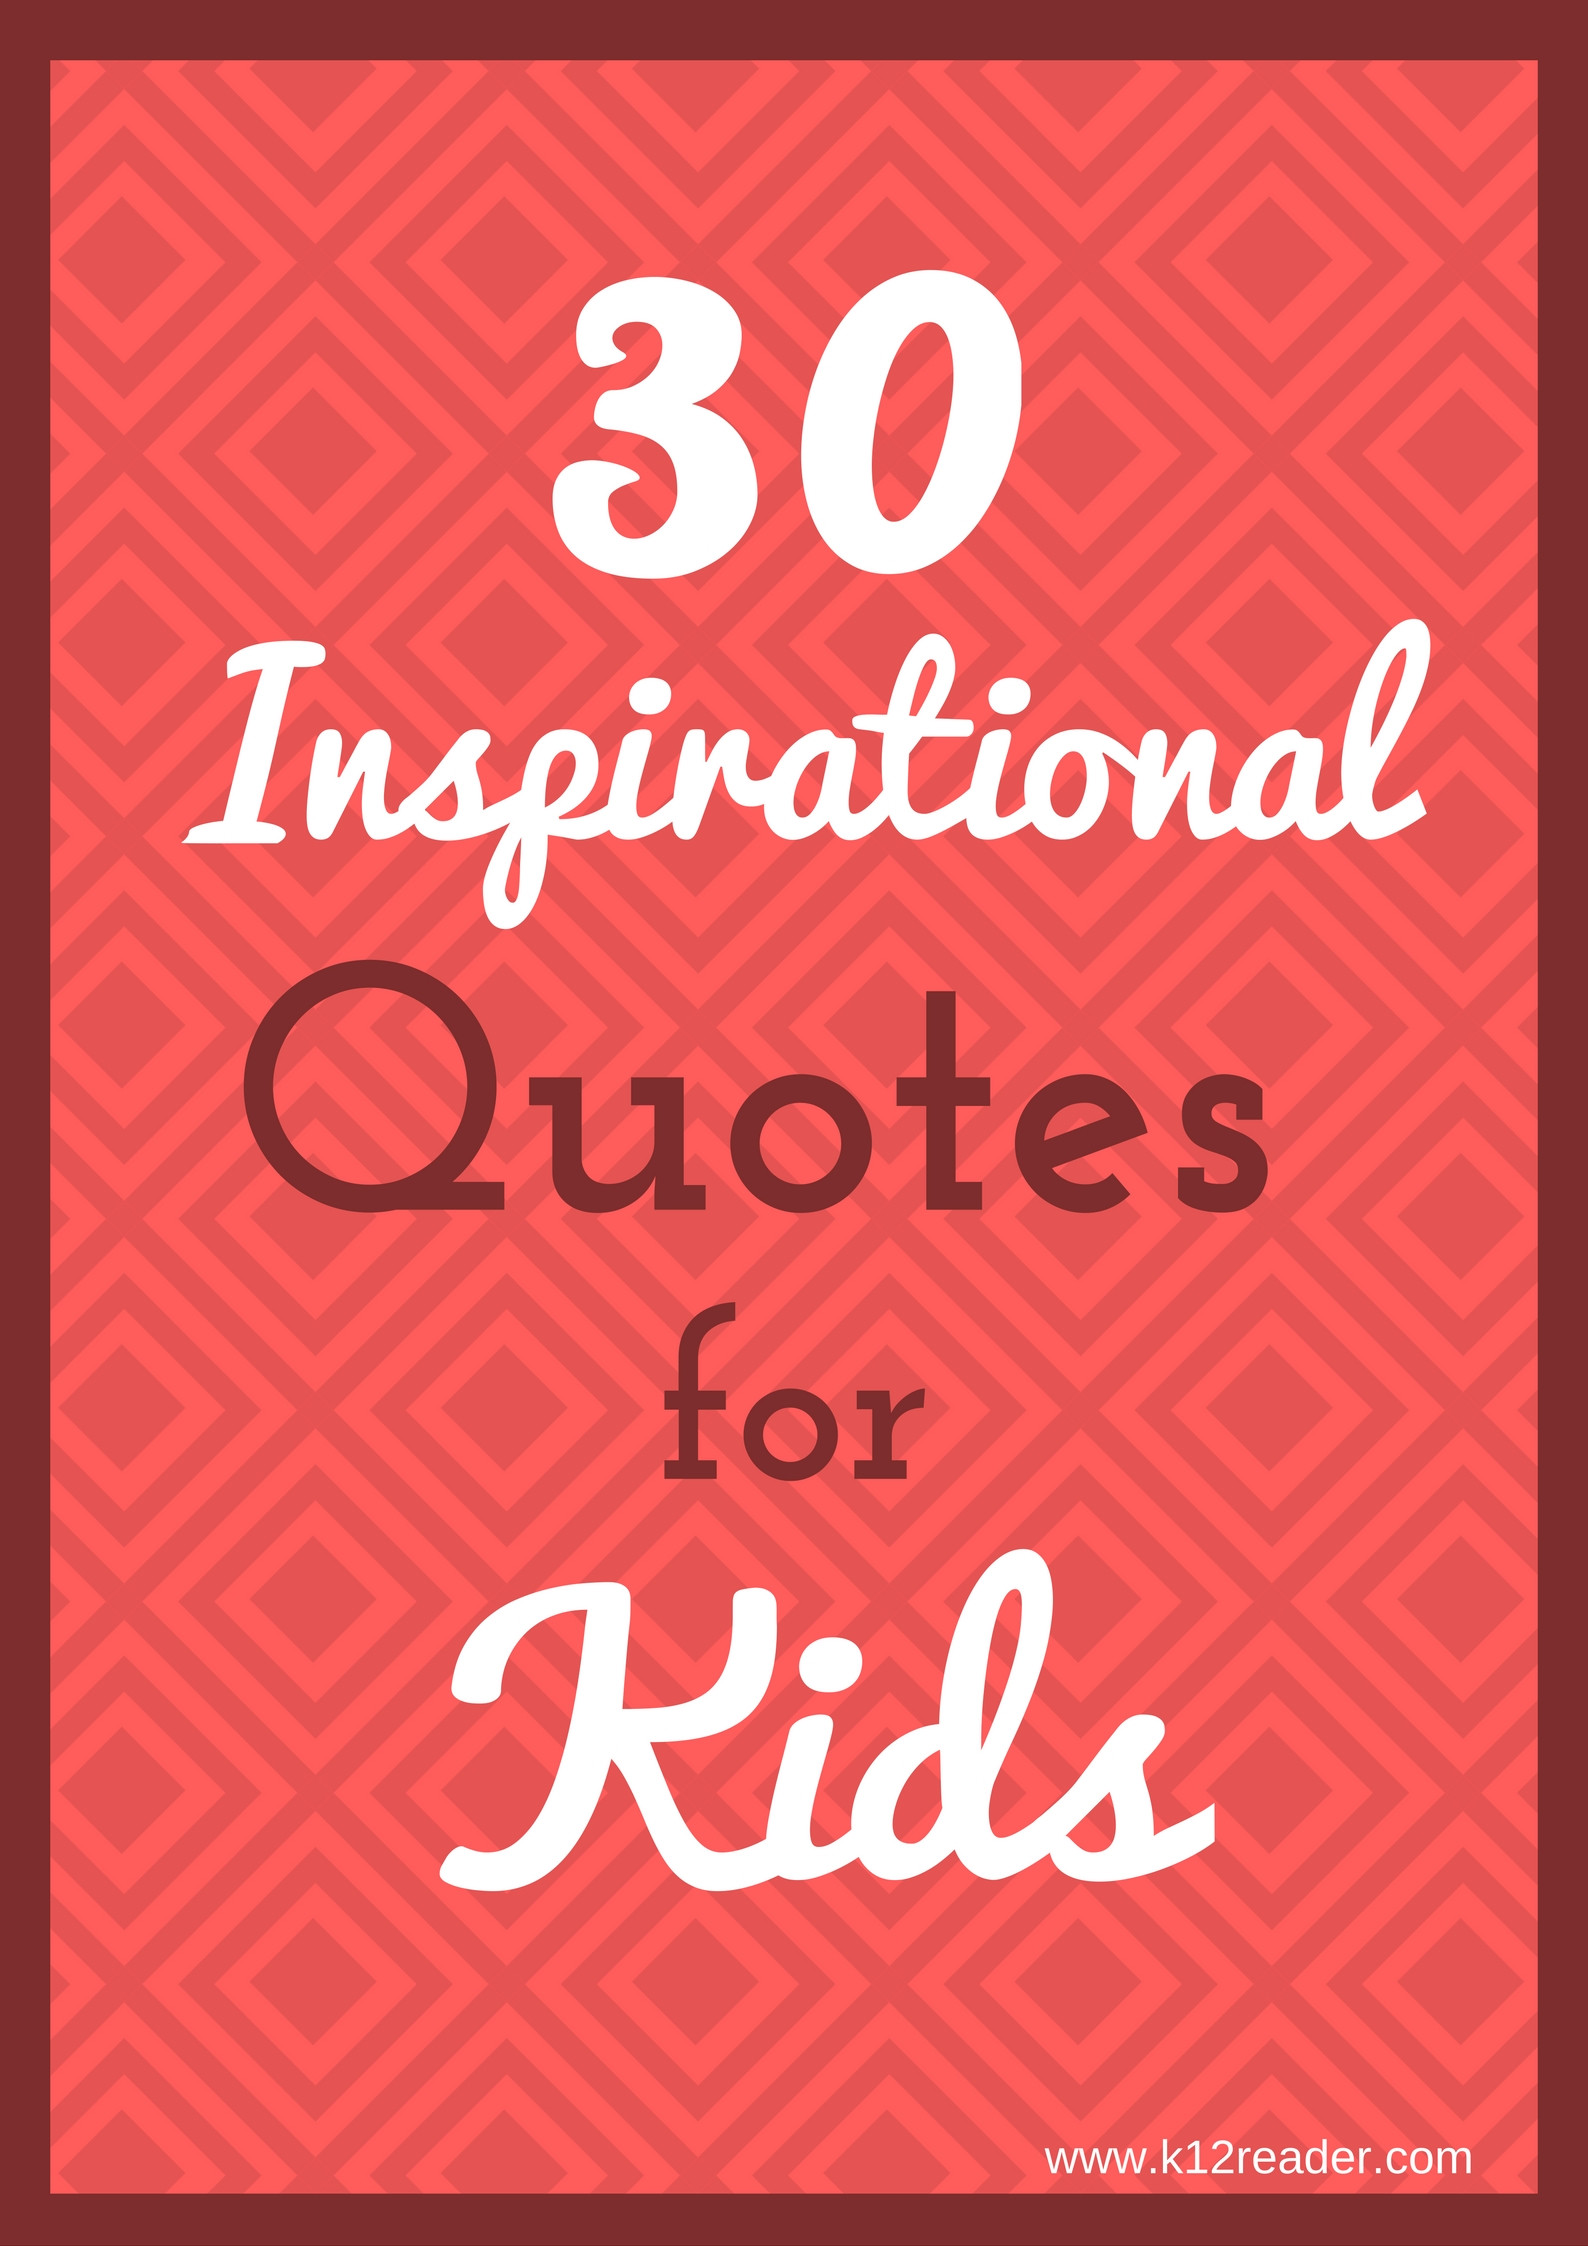 Inspirational Quotes For Kids
 30 Inspirational Quotes for Kids